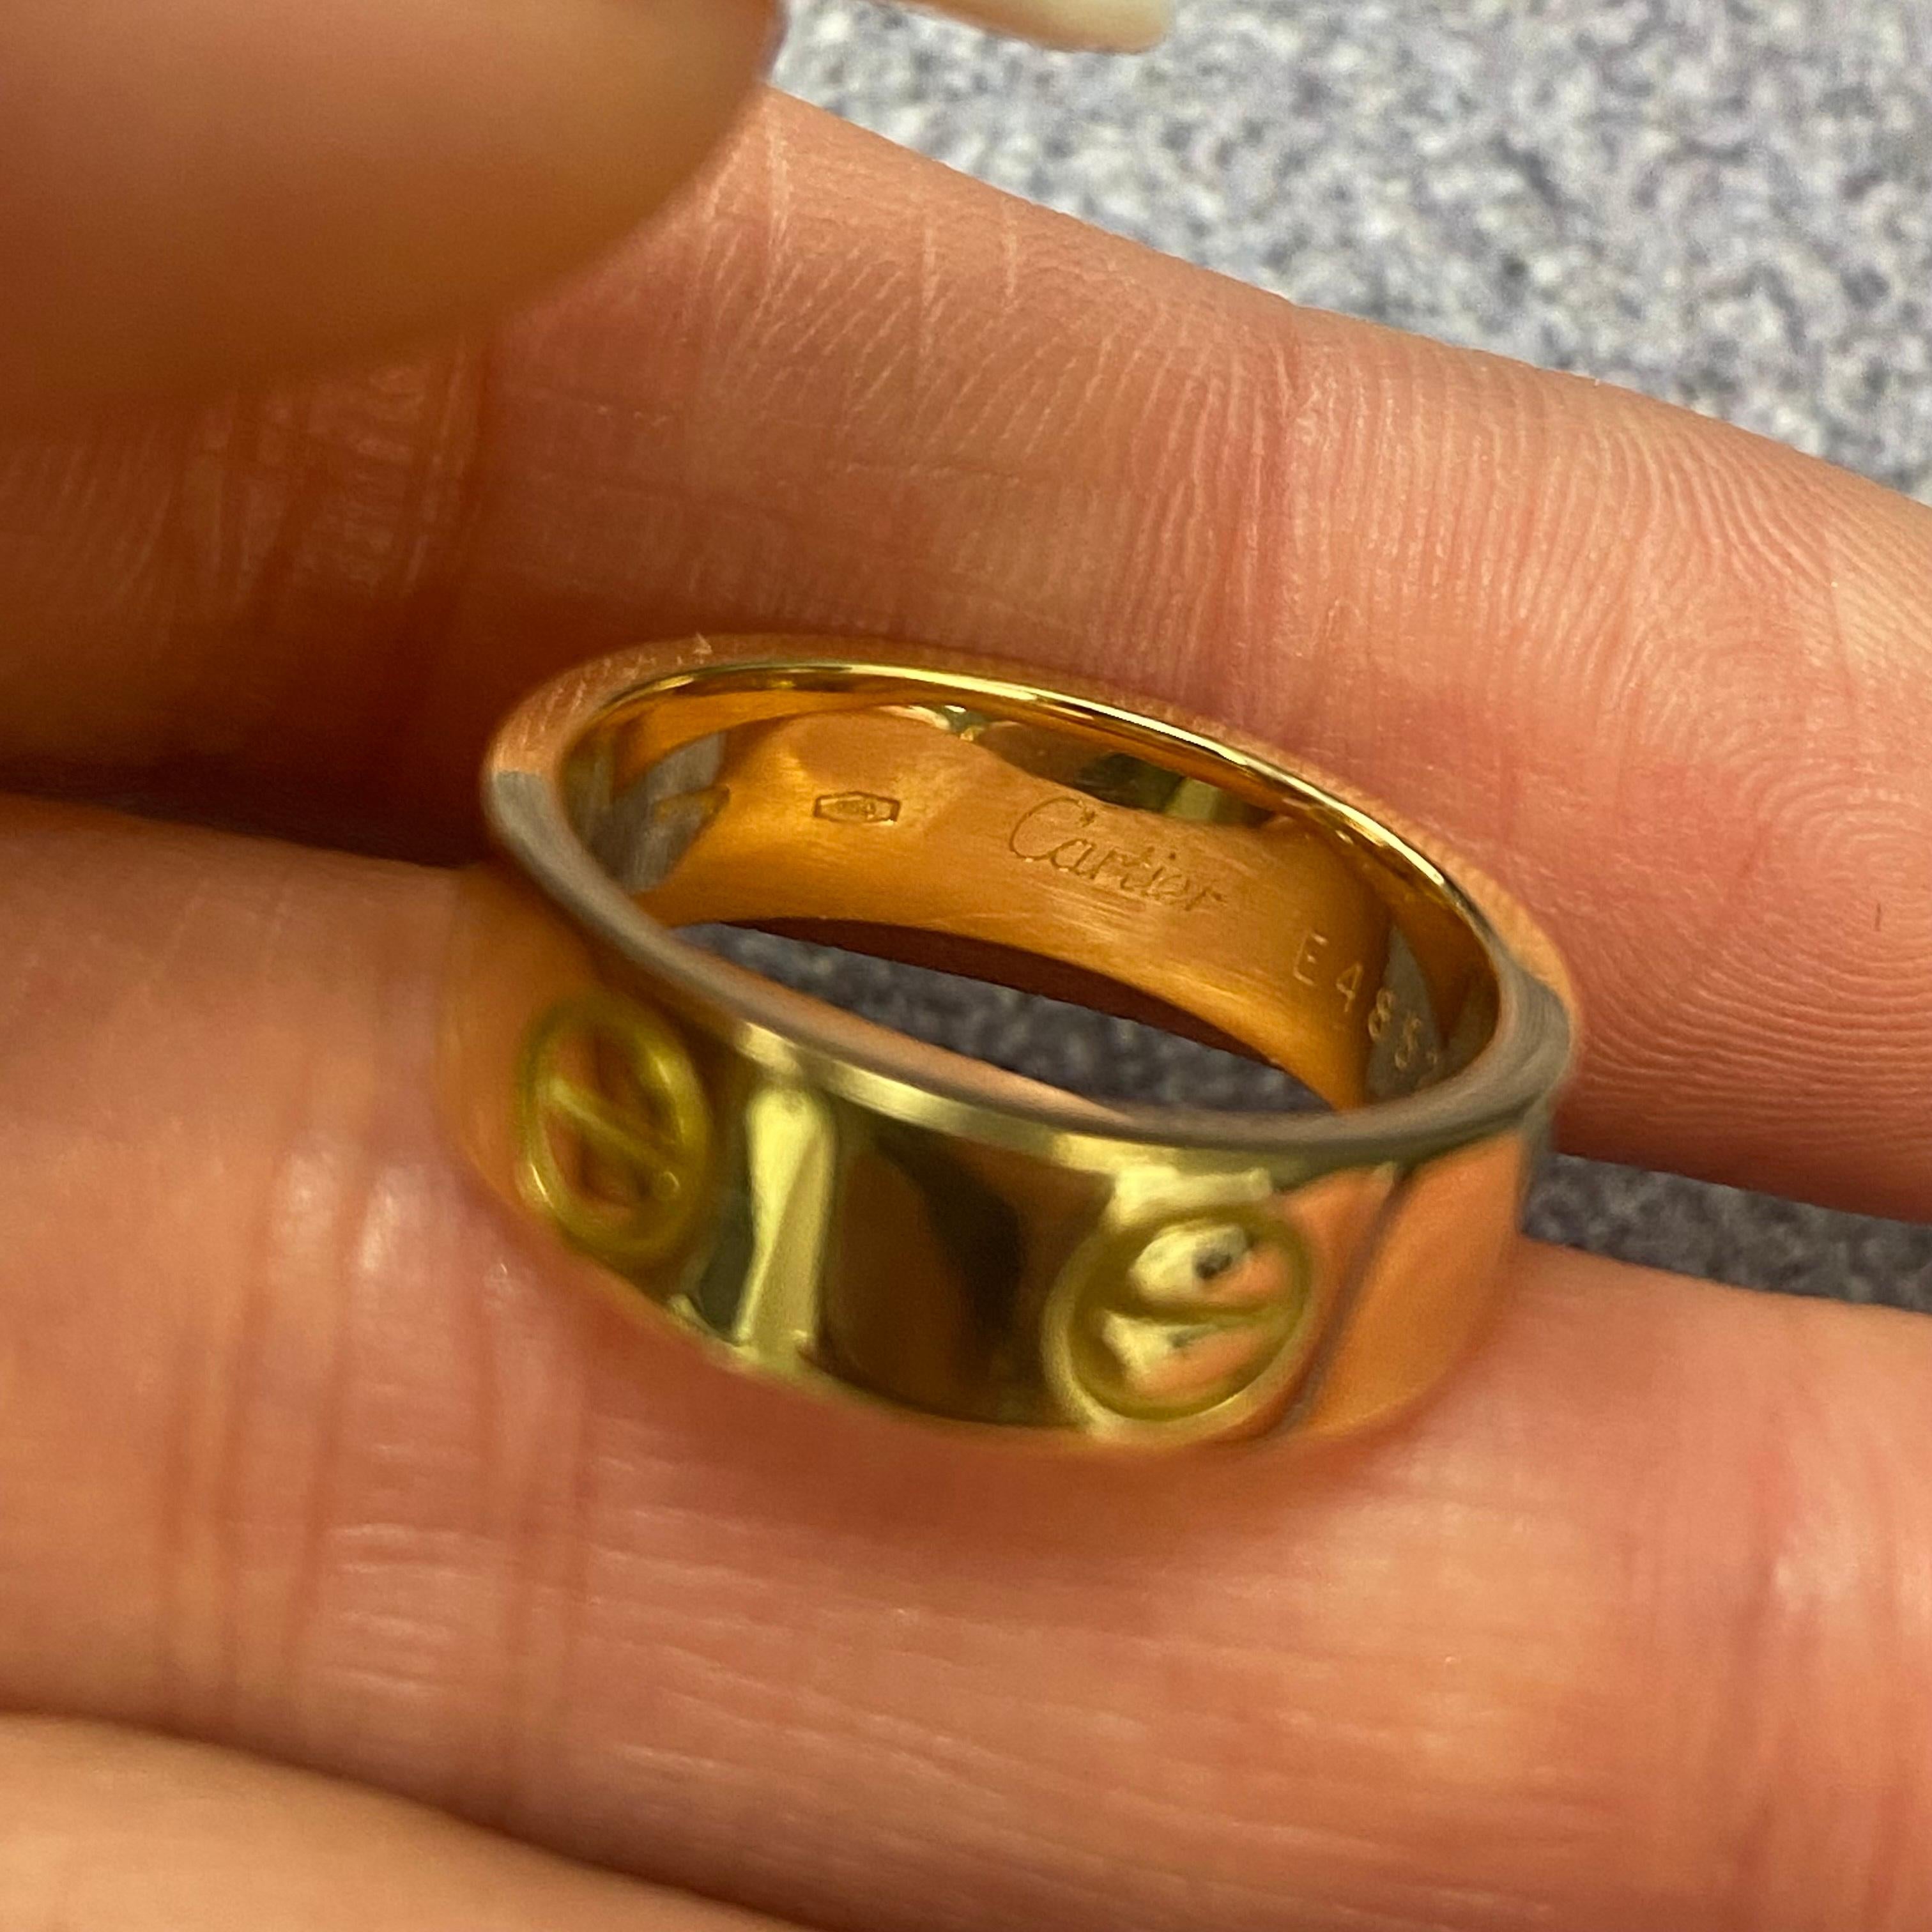 Cartier Love ring in 18K yellow gold. Ring size 50 US 5.25. Width: 5.5mm. Old style. The ring is in great condition. Original box and papers are not included. Comes with a presentable gift box.
